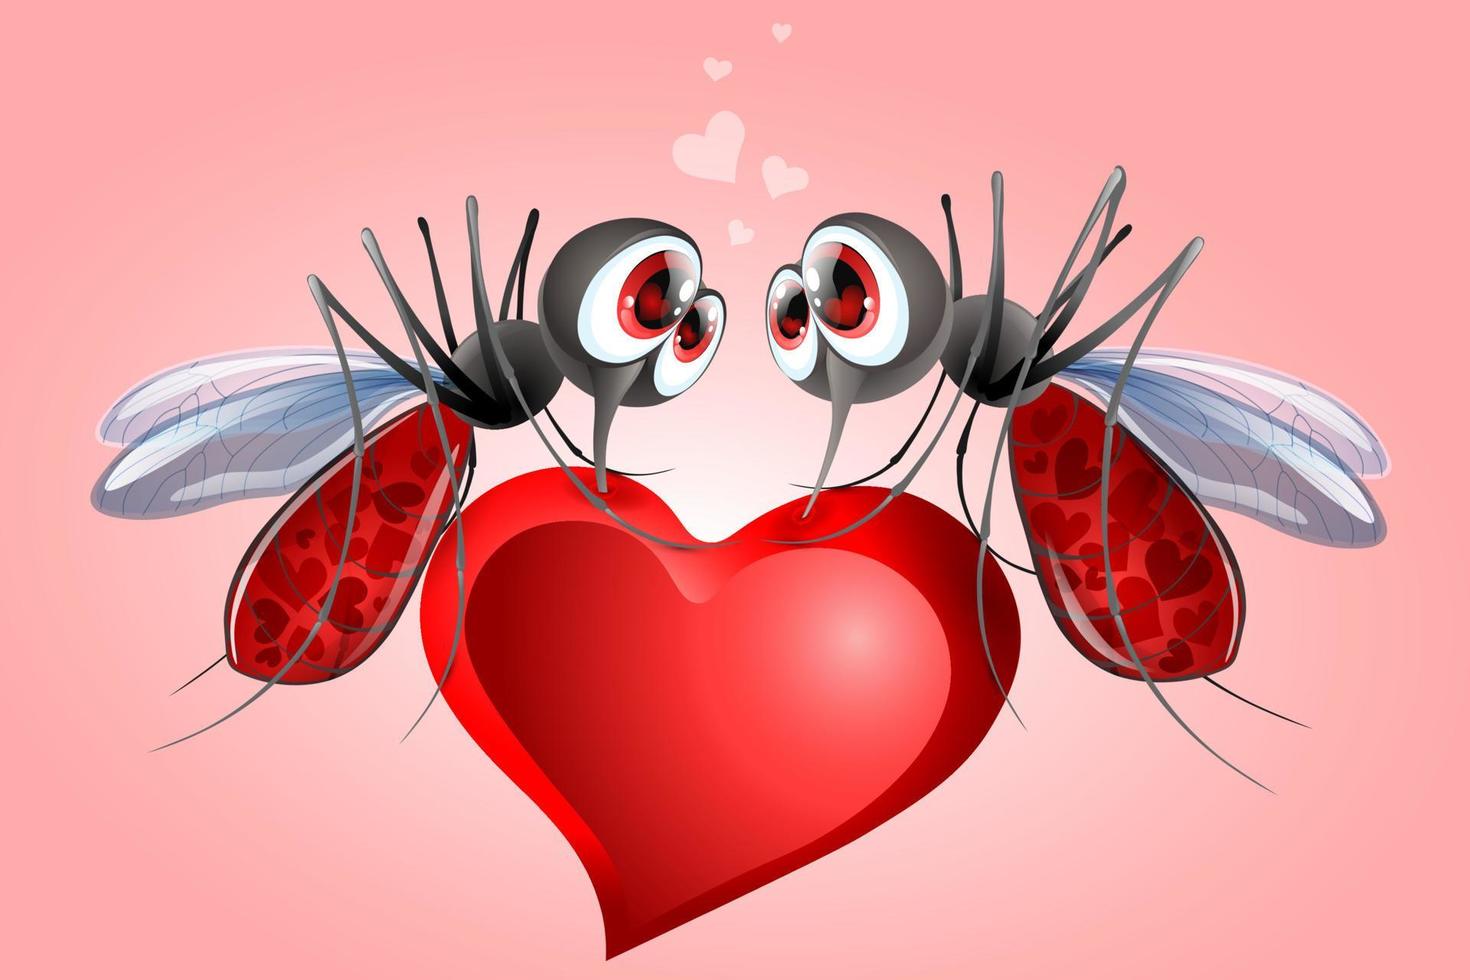 Mosquitos on heart  CLOSE UP vector